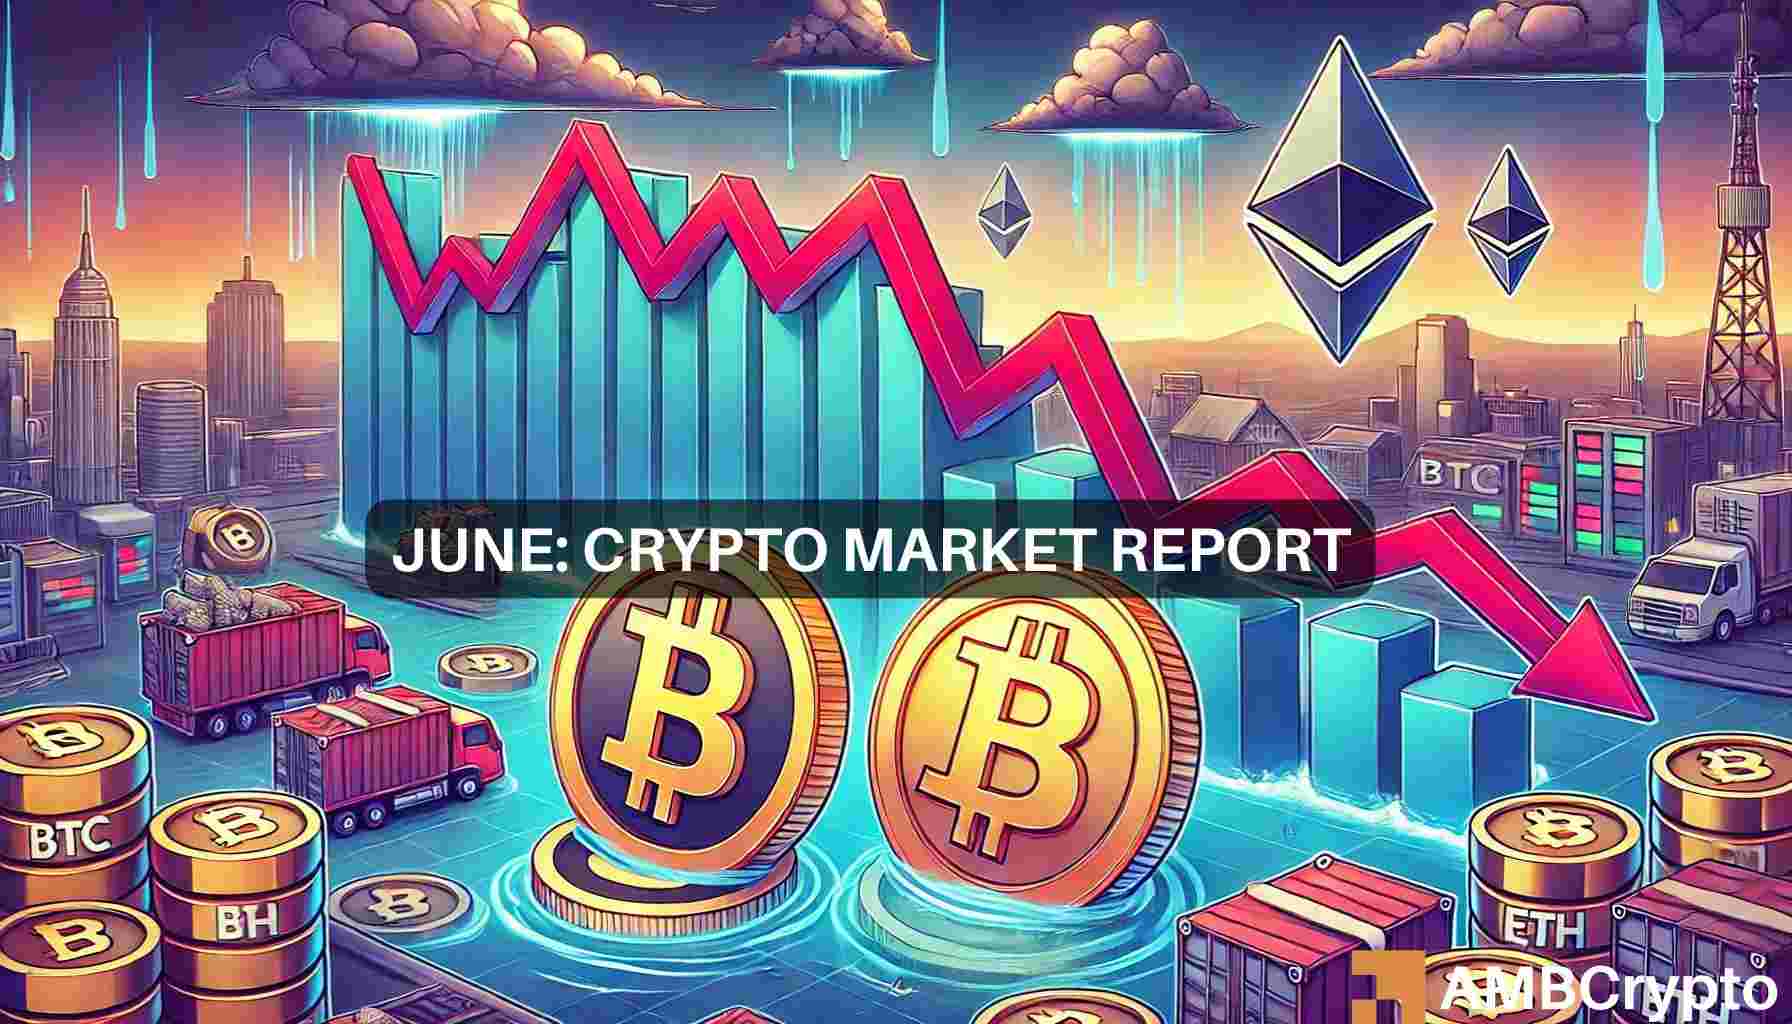 Crypto exchanges hit hard in June – Here’s what happened